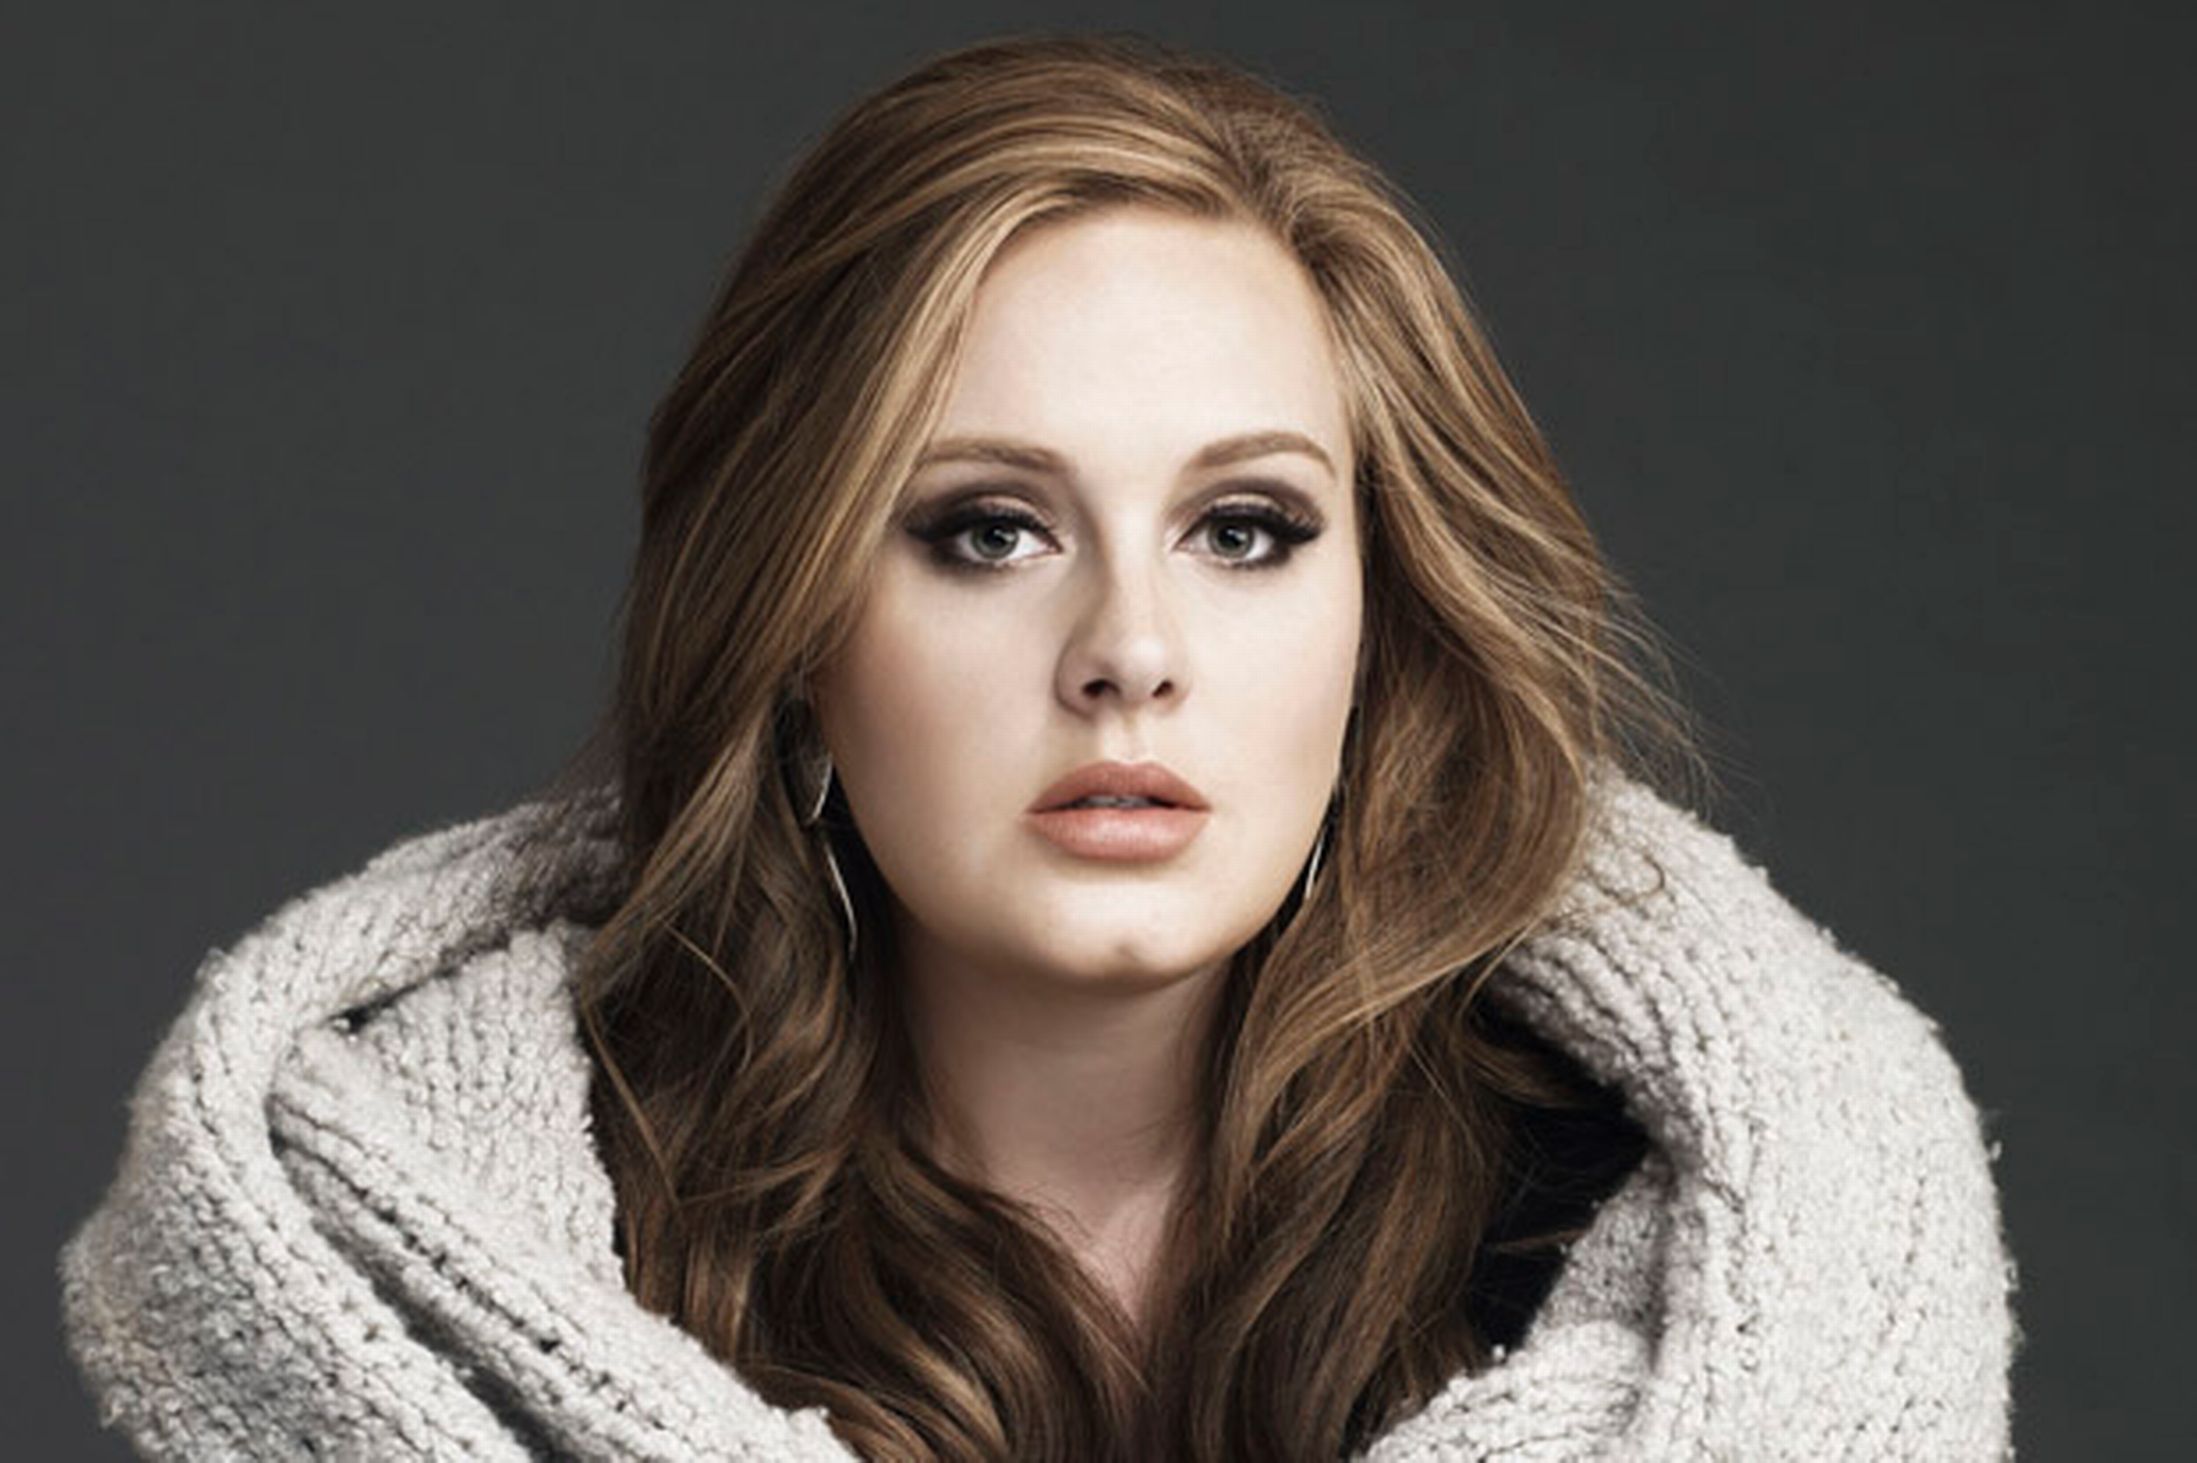 Petition Wants Singer Adele To Publicly Recognize Her “White Privilege”